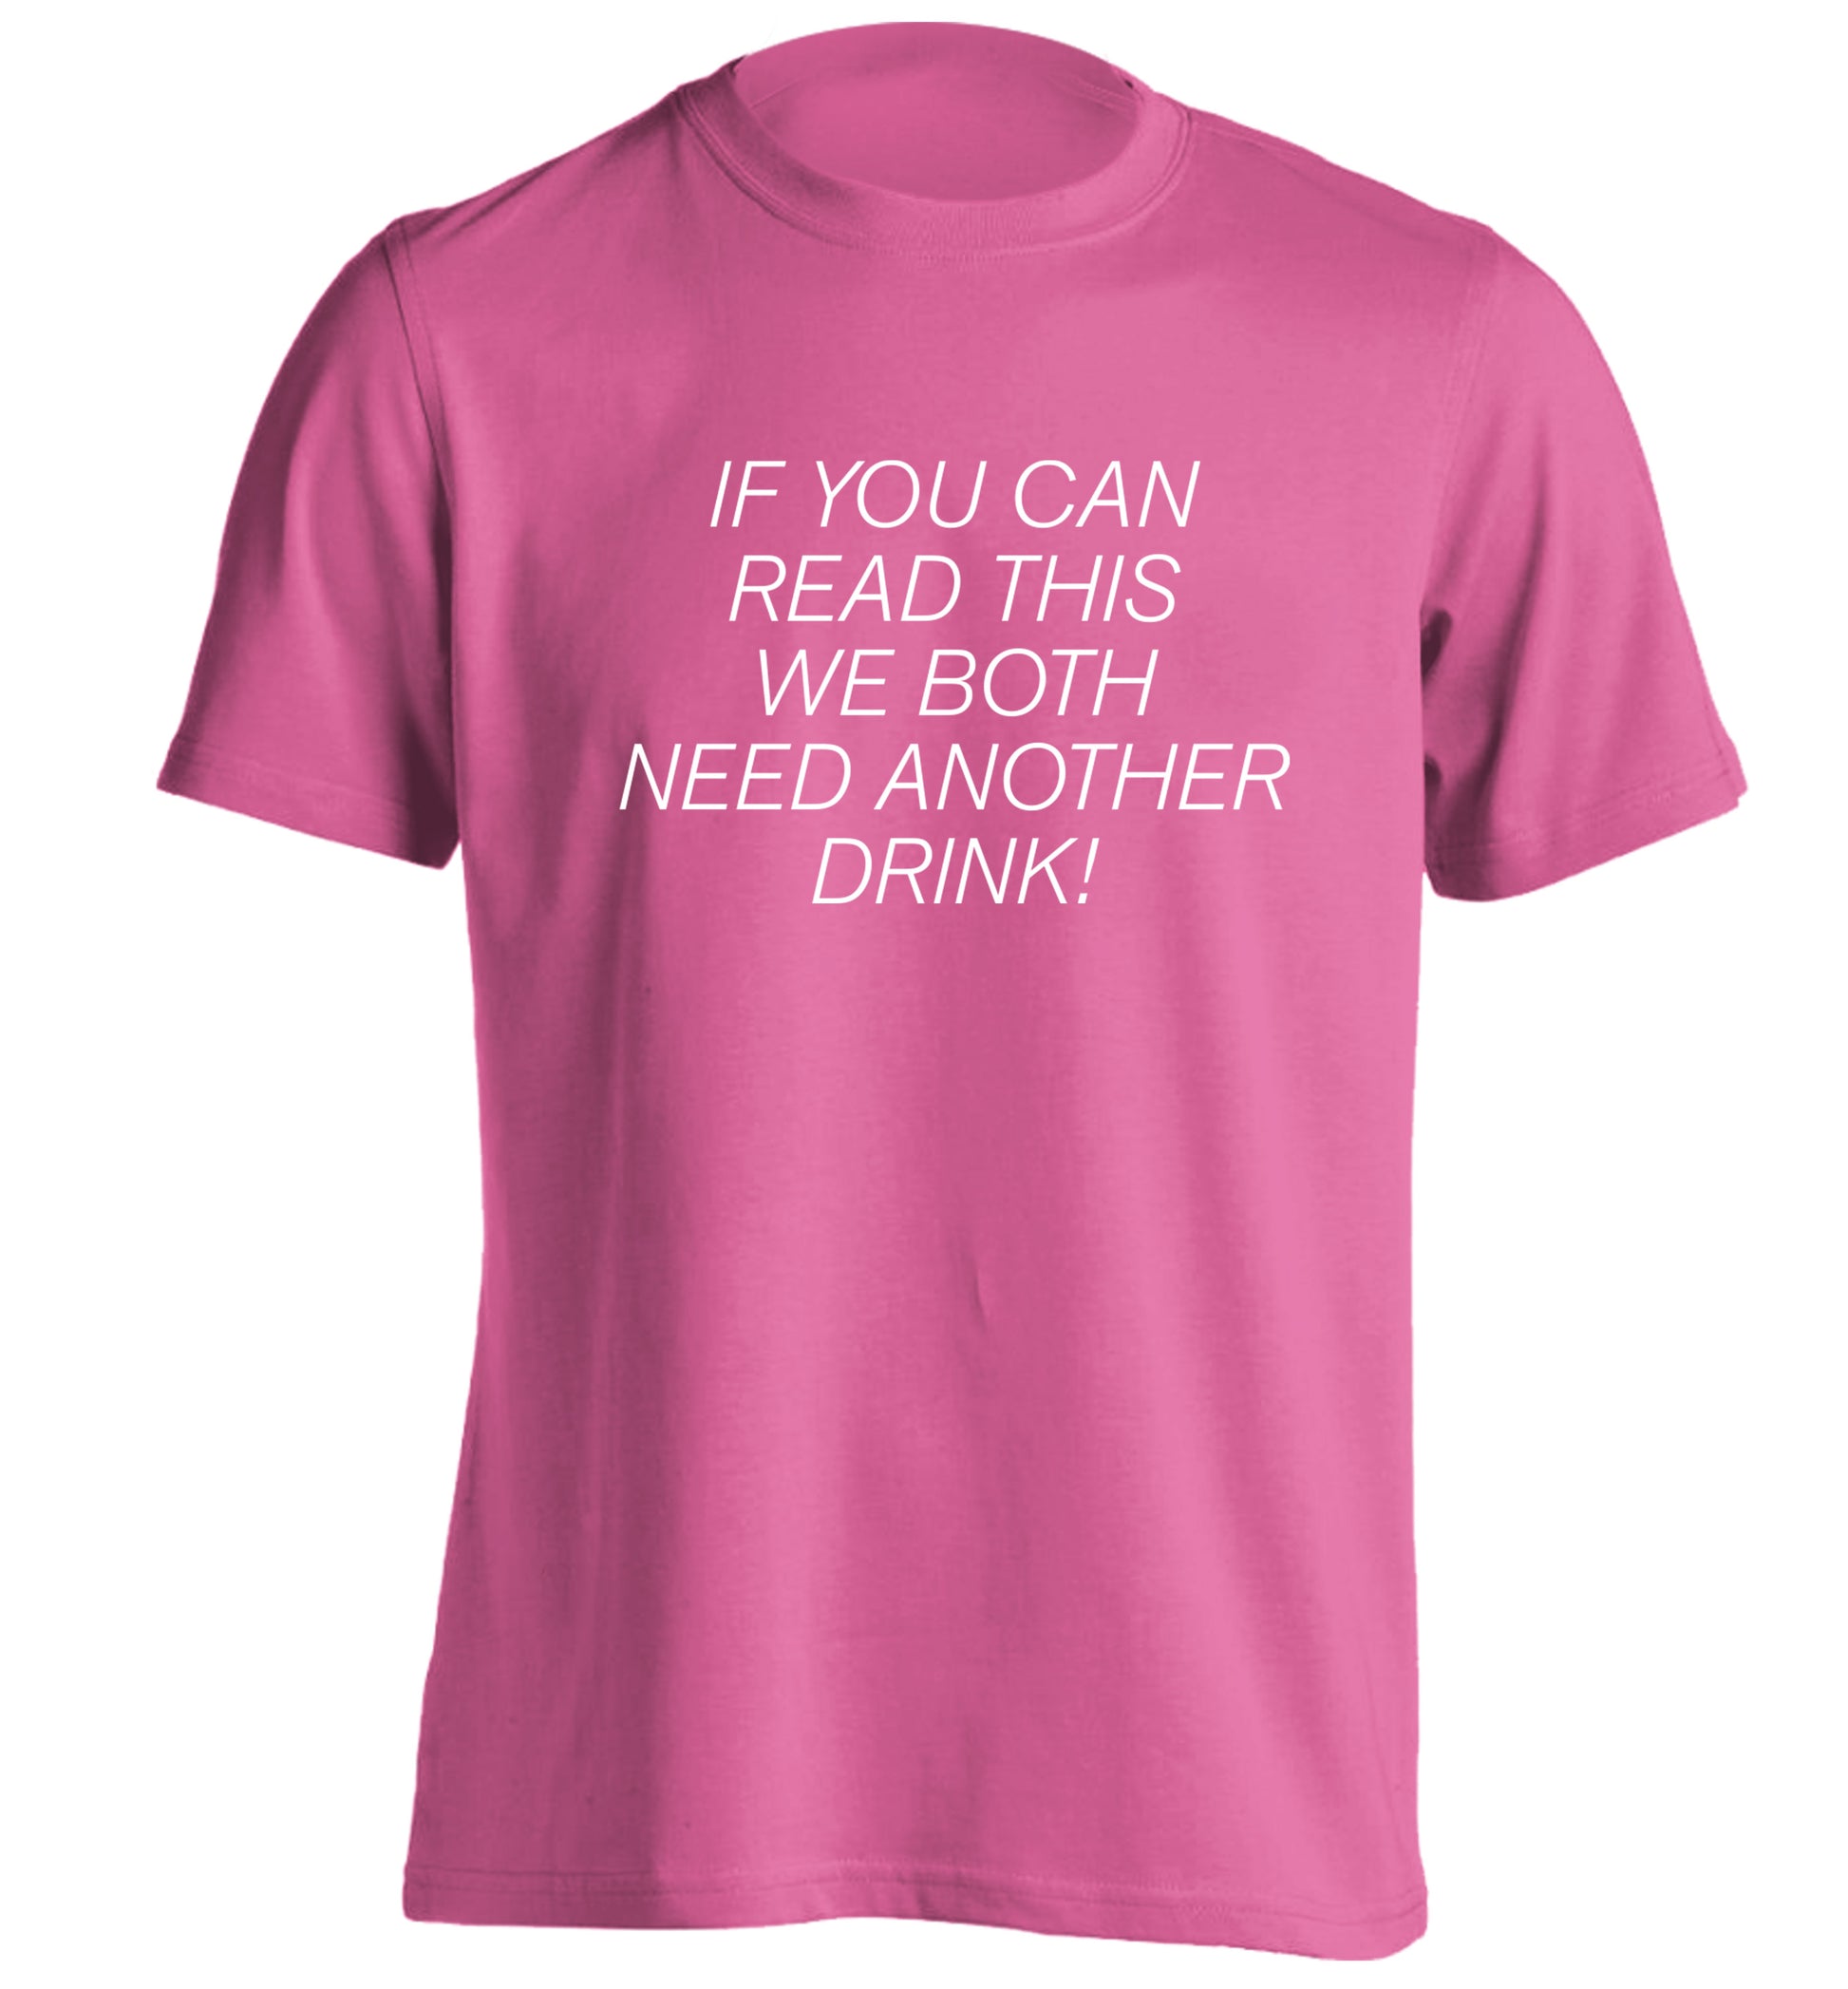 If you can read this we both need another drink! adults unisex pink Tshirt 2XL